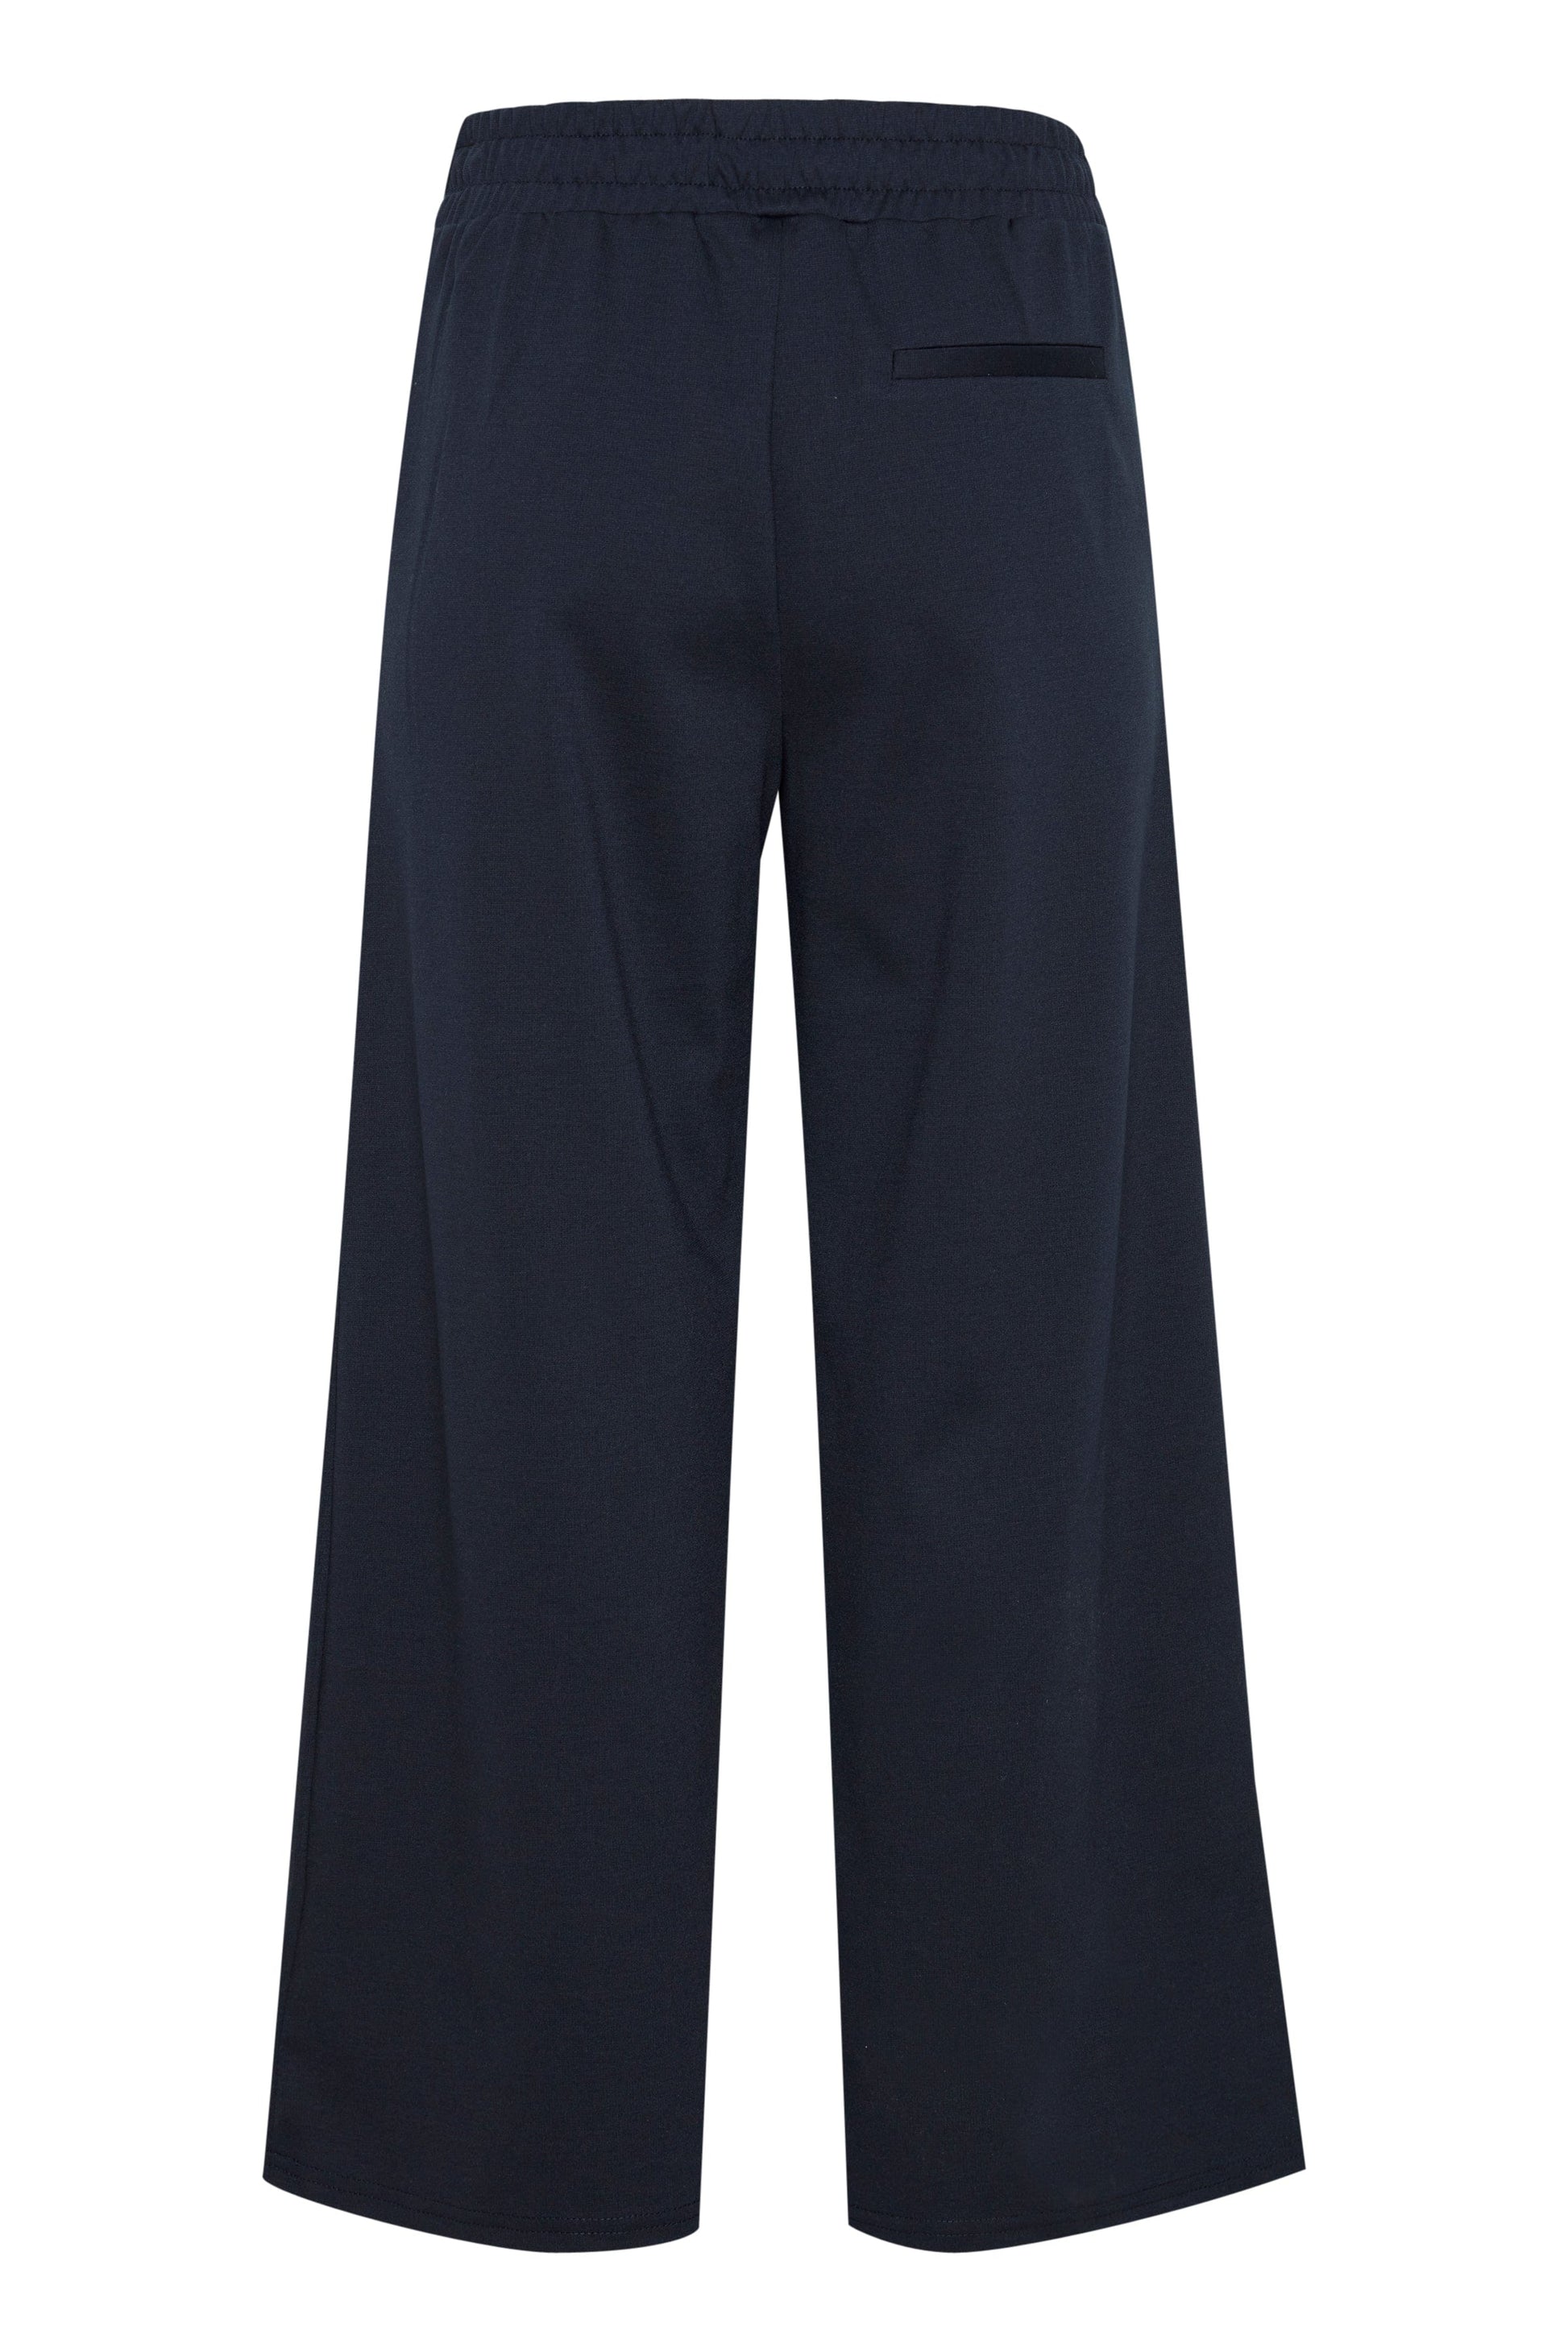 Kate Sus Wide Trousers in Total Eclipse Blue Trousers Ichi 